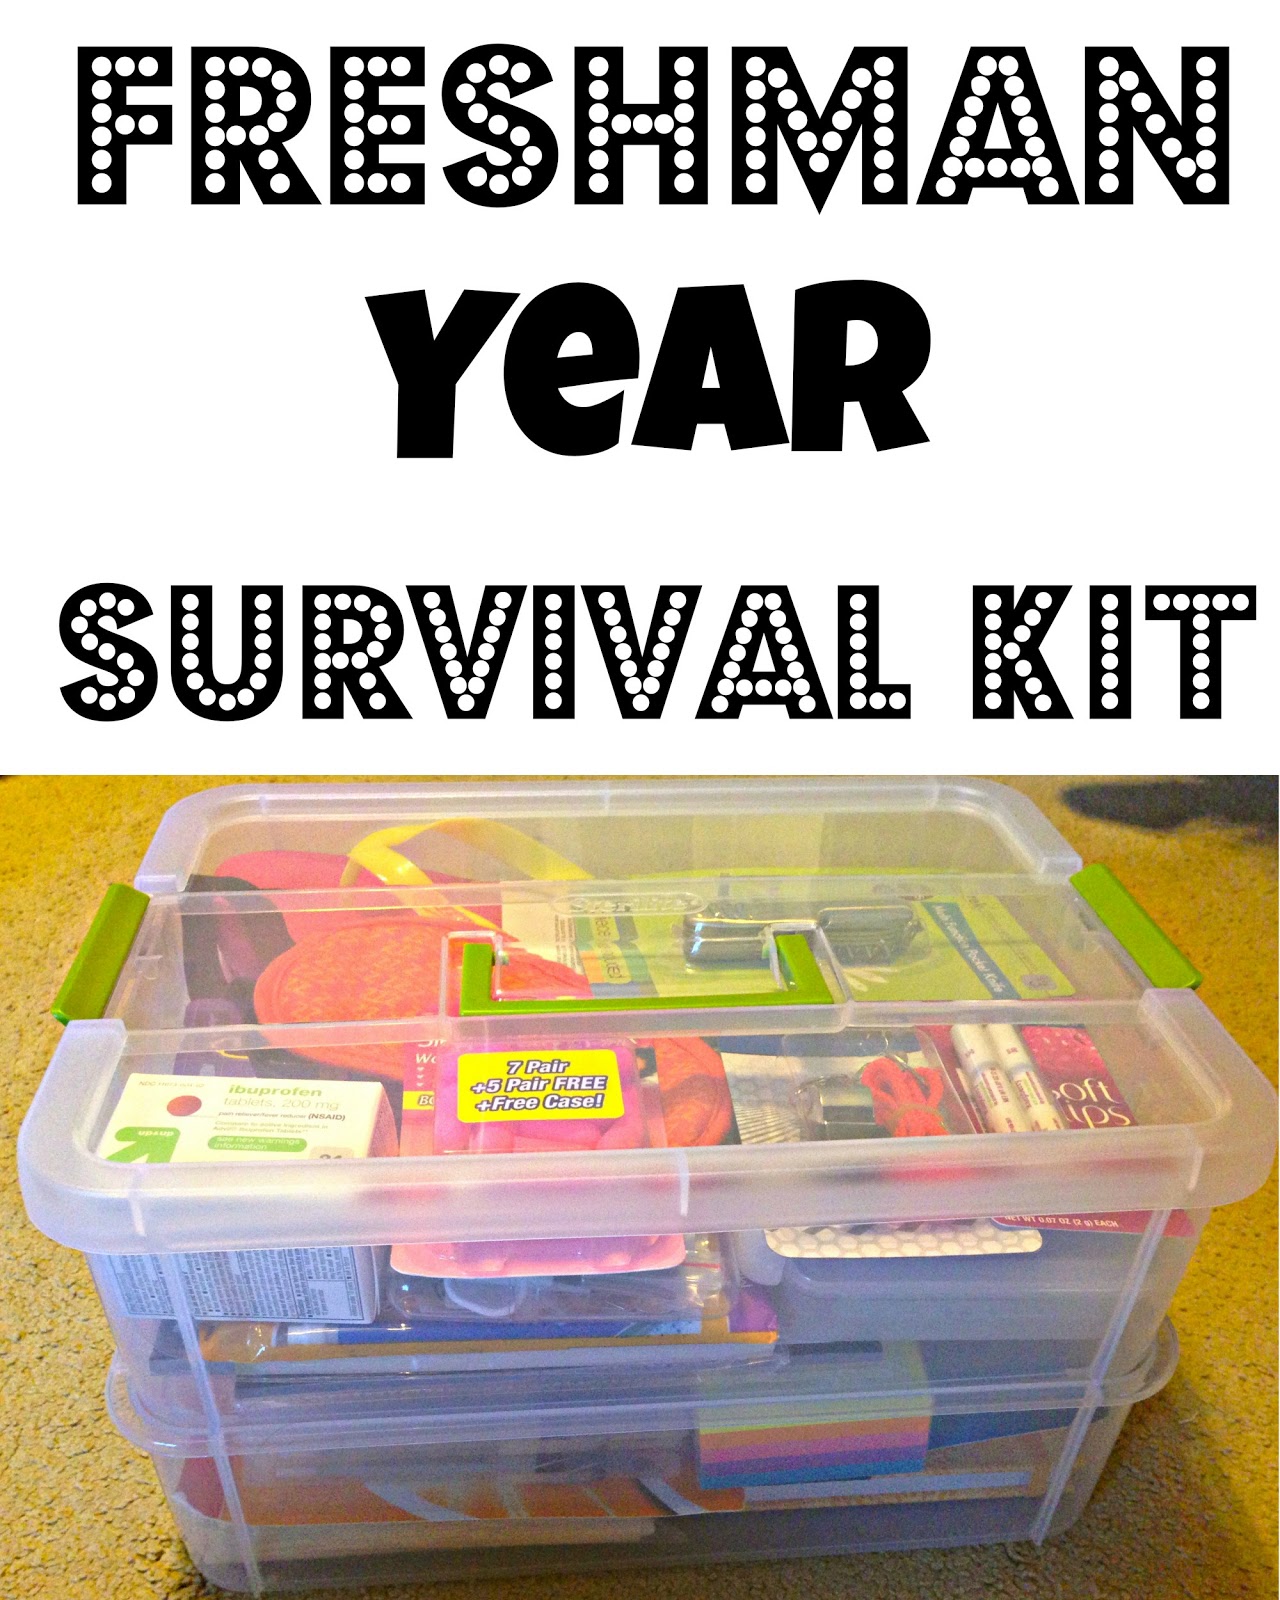 Survival kit for day hikers, minecraft survival games lobby secrets